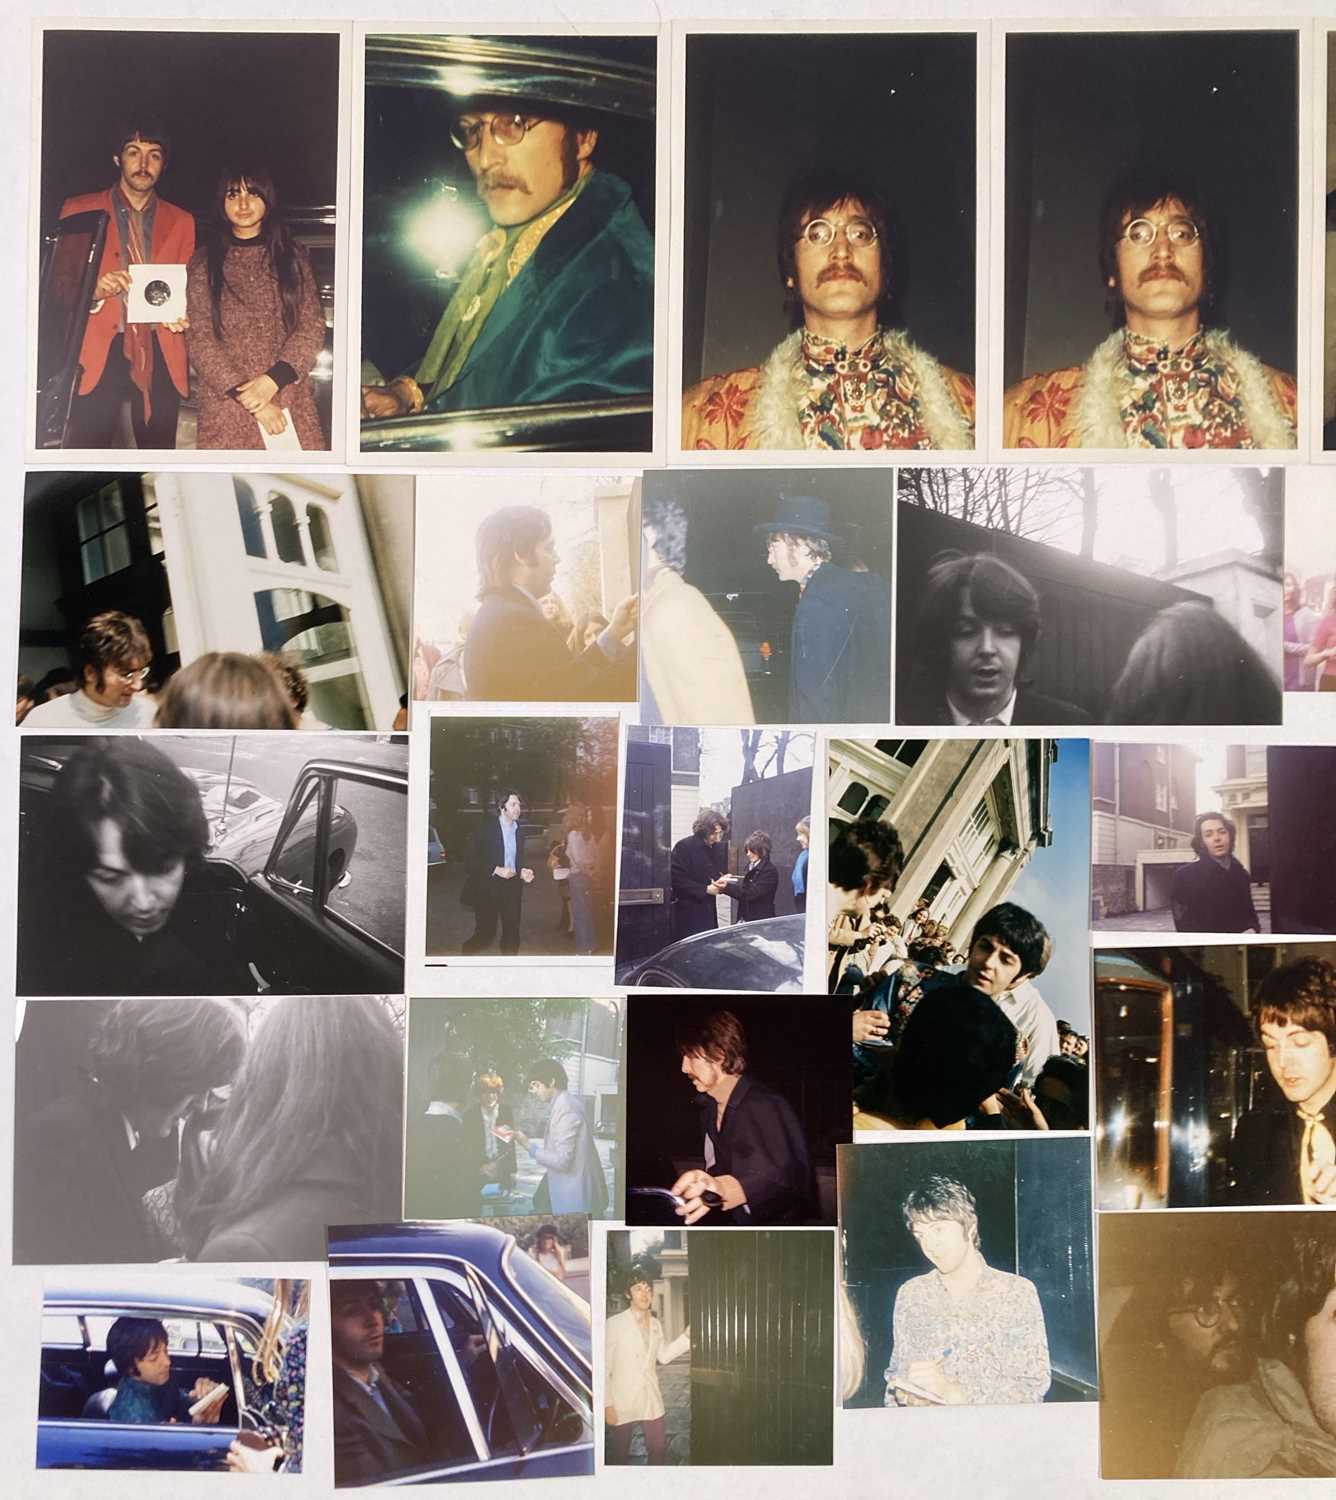 THE BEATLES - PHOTO PRINTS OF IMAGES BY LIZZIE BRAVO / COLLECTION OF CANDID SHOTS. - Image 2 of 4